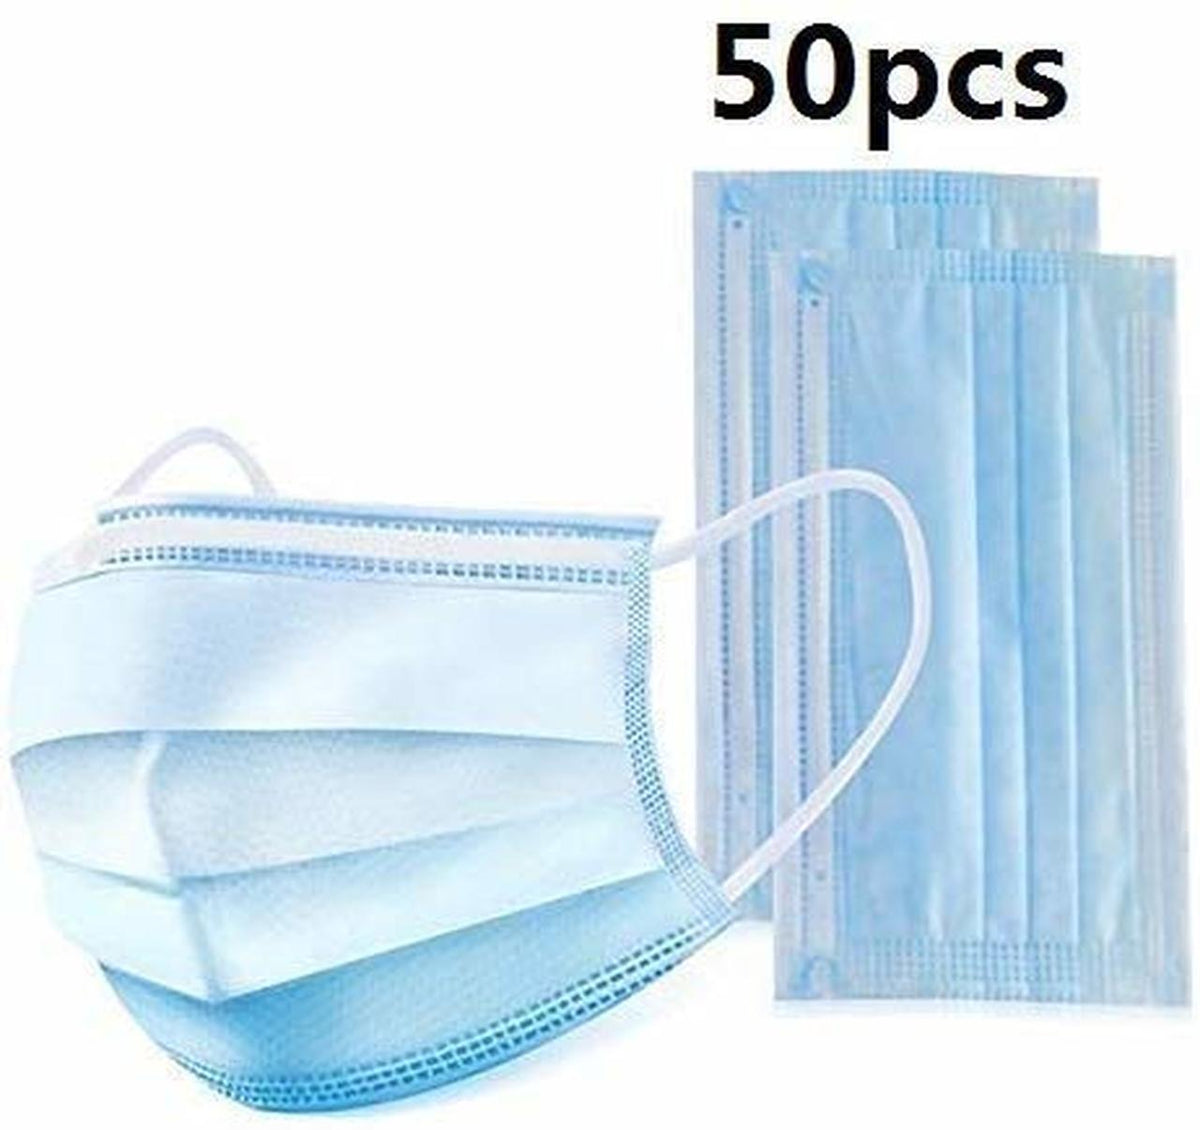 50 Pcs Disposable Face Masks, Surgical type non-medical Dust Breathable %95 filtration rate Face Mask, Comfortable Sanitary Mask Thick 3-Layer Elastic Earloop